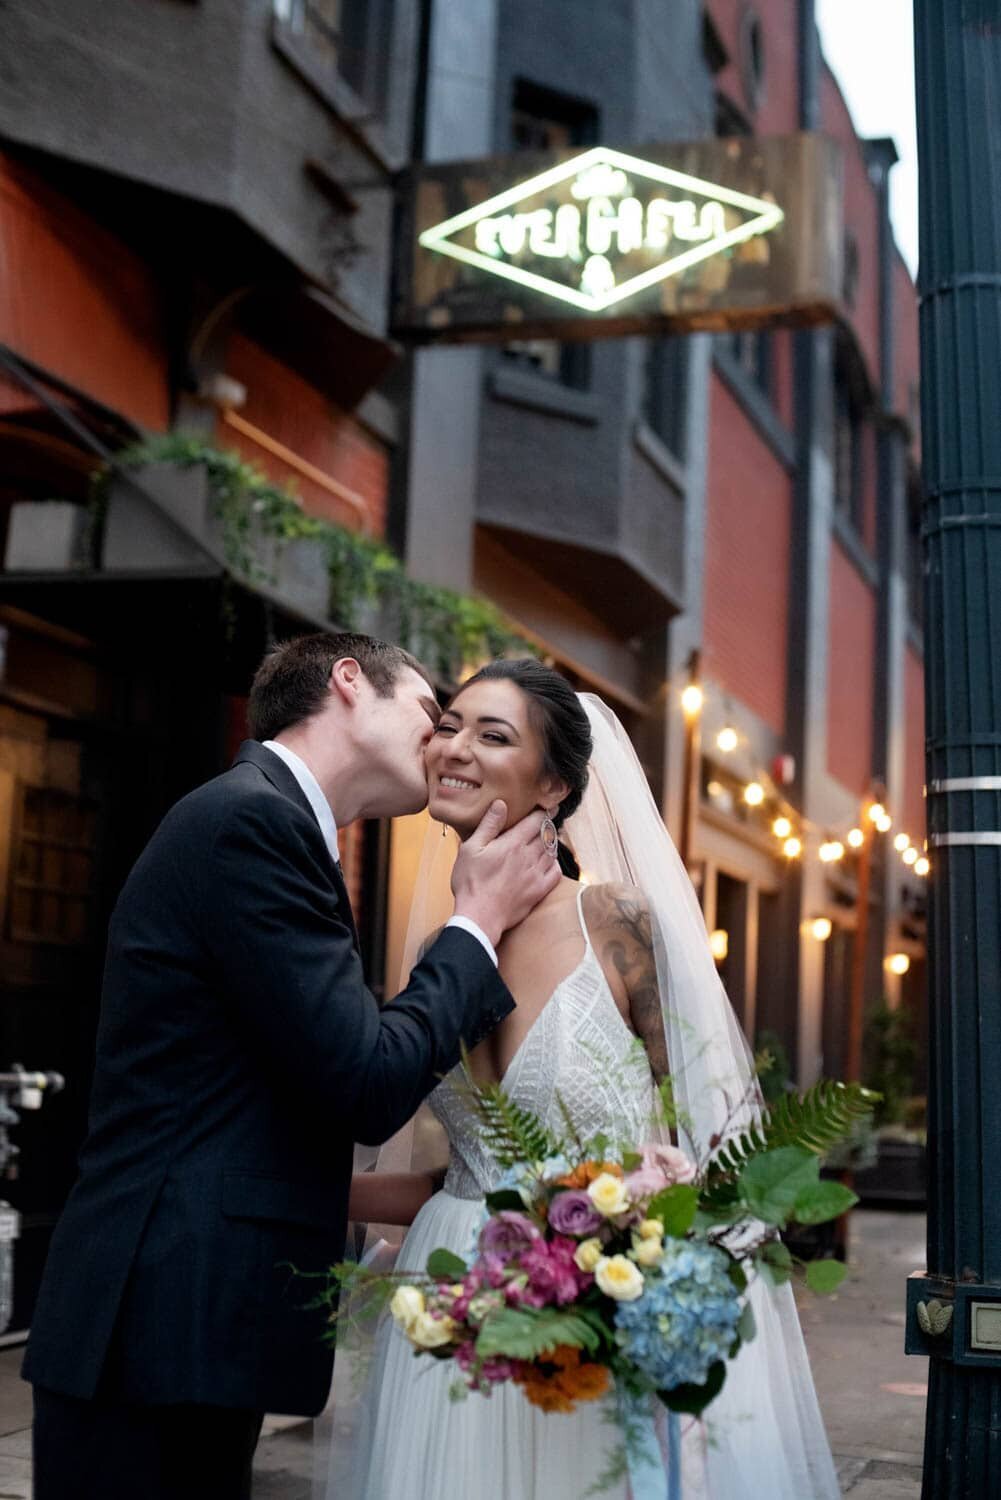 a man kisses a bride's cheek in front of The Evergreen in SE portland